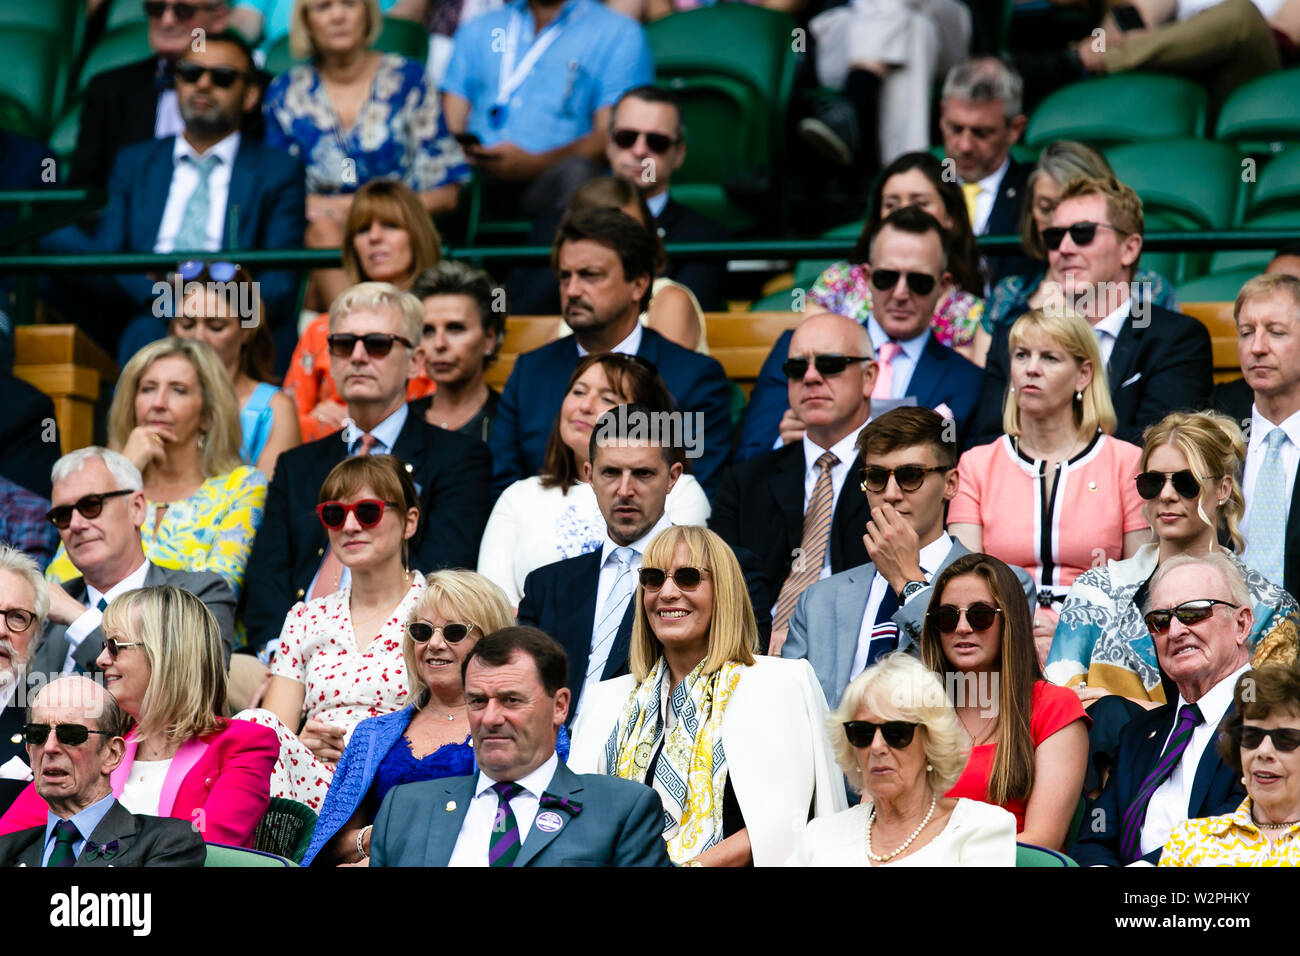 London, UK, 10th July 2019: The royal box fills up with spectators for the  Mens Singles Quarter Final between Goffin and Djokovic at day 9 at the  Wimbledon Tennis Championships 2019 at